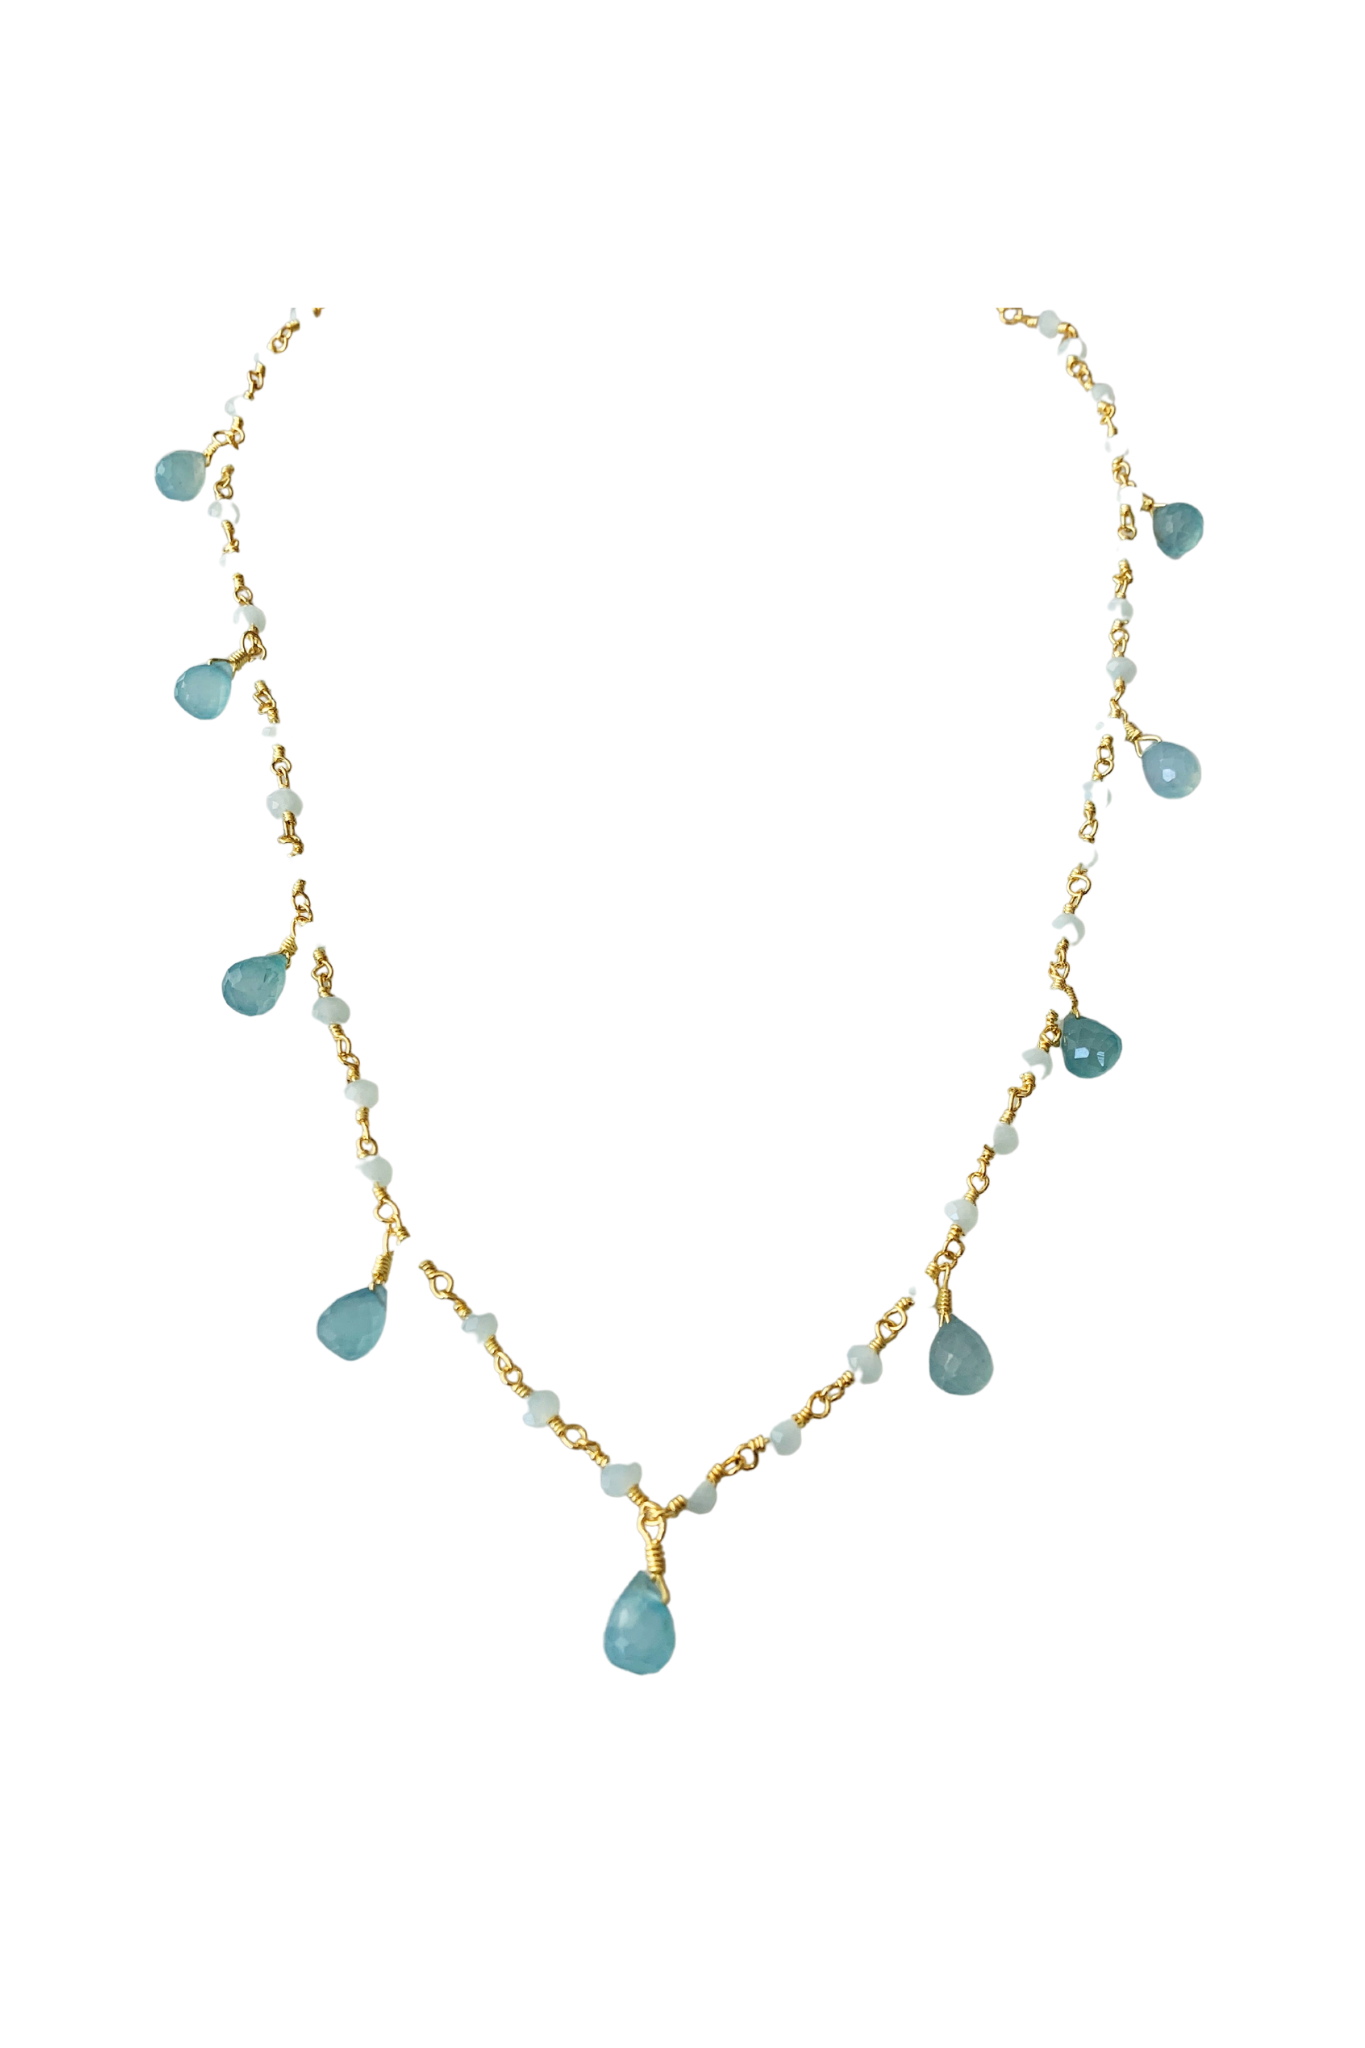 Balmy Nights Chalcedony Teardrop Necklace in Gold